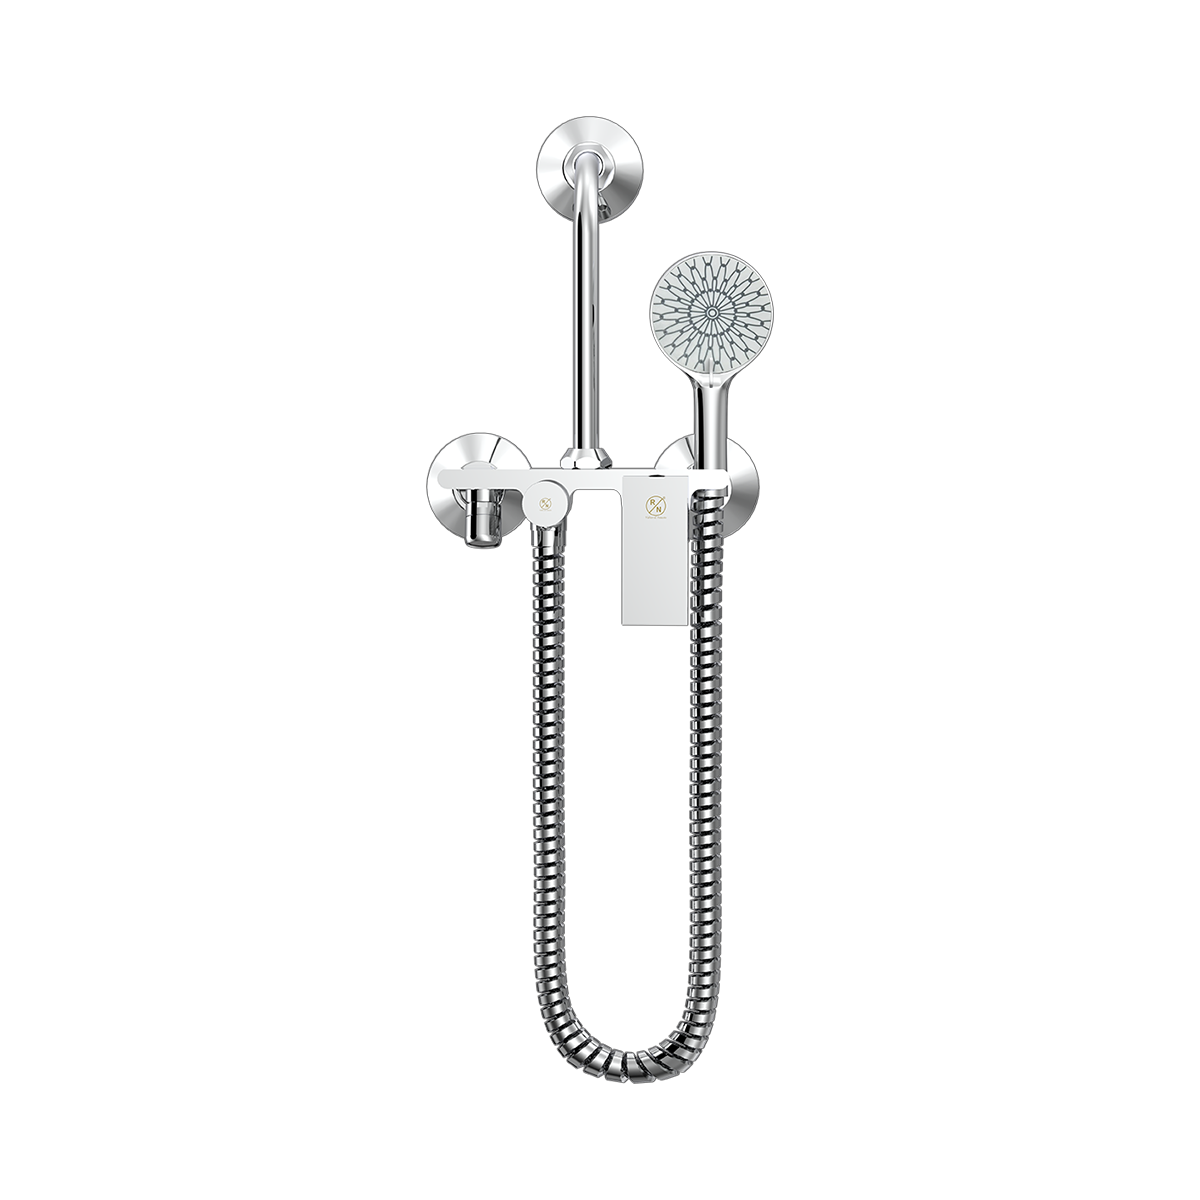 Single Lever Wall Mixer With Provision For Both Ov